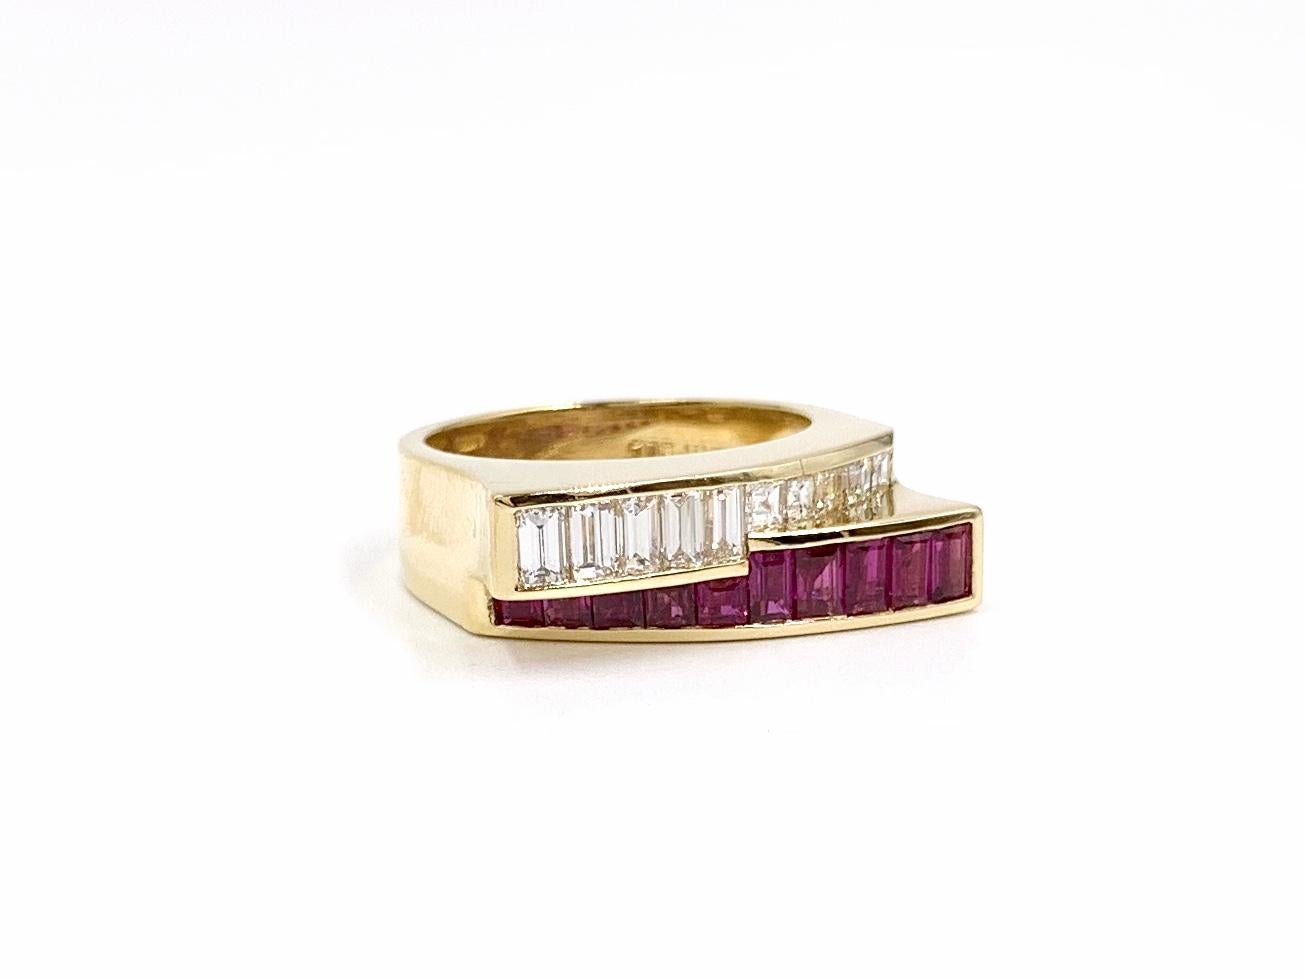 A sleek and ultra modern stacked style ring made with the finest diamonds and rubies by American designer Charles Krypell. This 18 karat yellow gold 7mm wide ring features approximately 1.20 carats of well saturated rubies. Five emerald cut and five